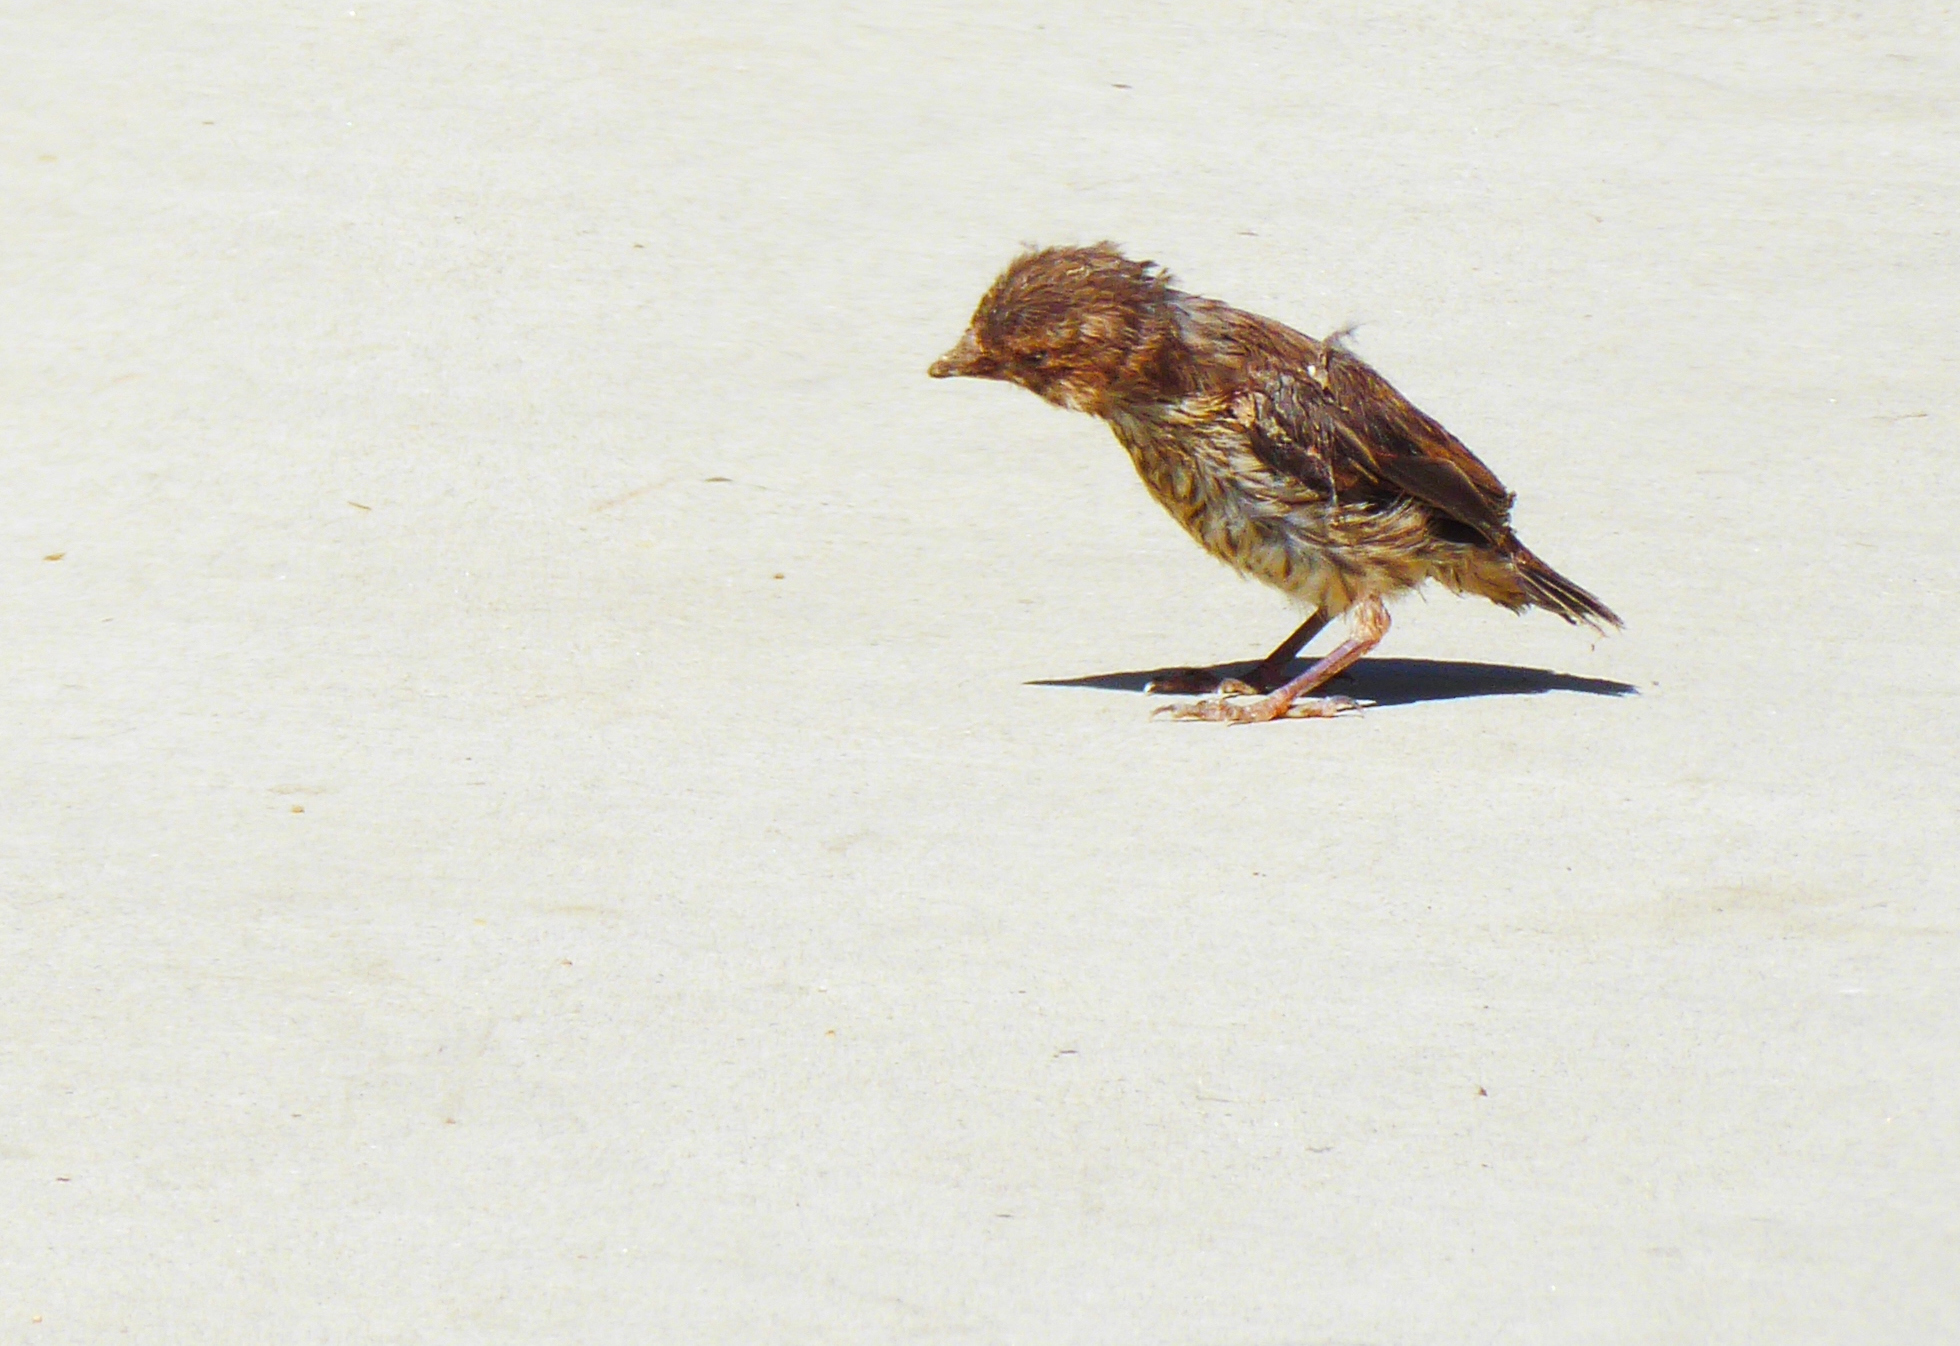 A young, still wet brown bird stares down at the concrete with its head tilted and its eyes sort of closed. The image zooms very close in on it, as it is quite far away.